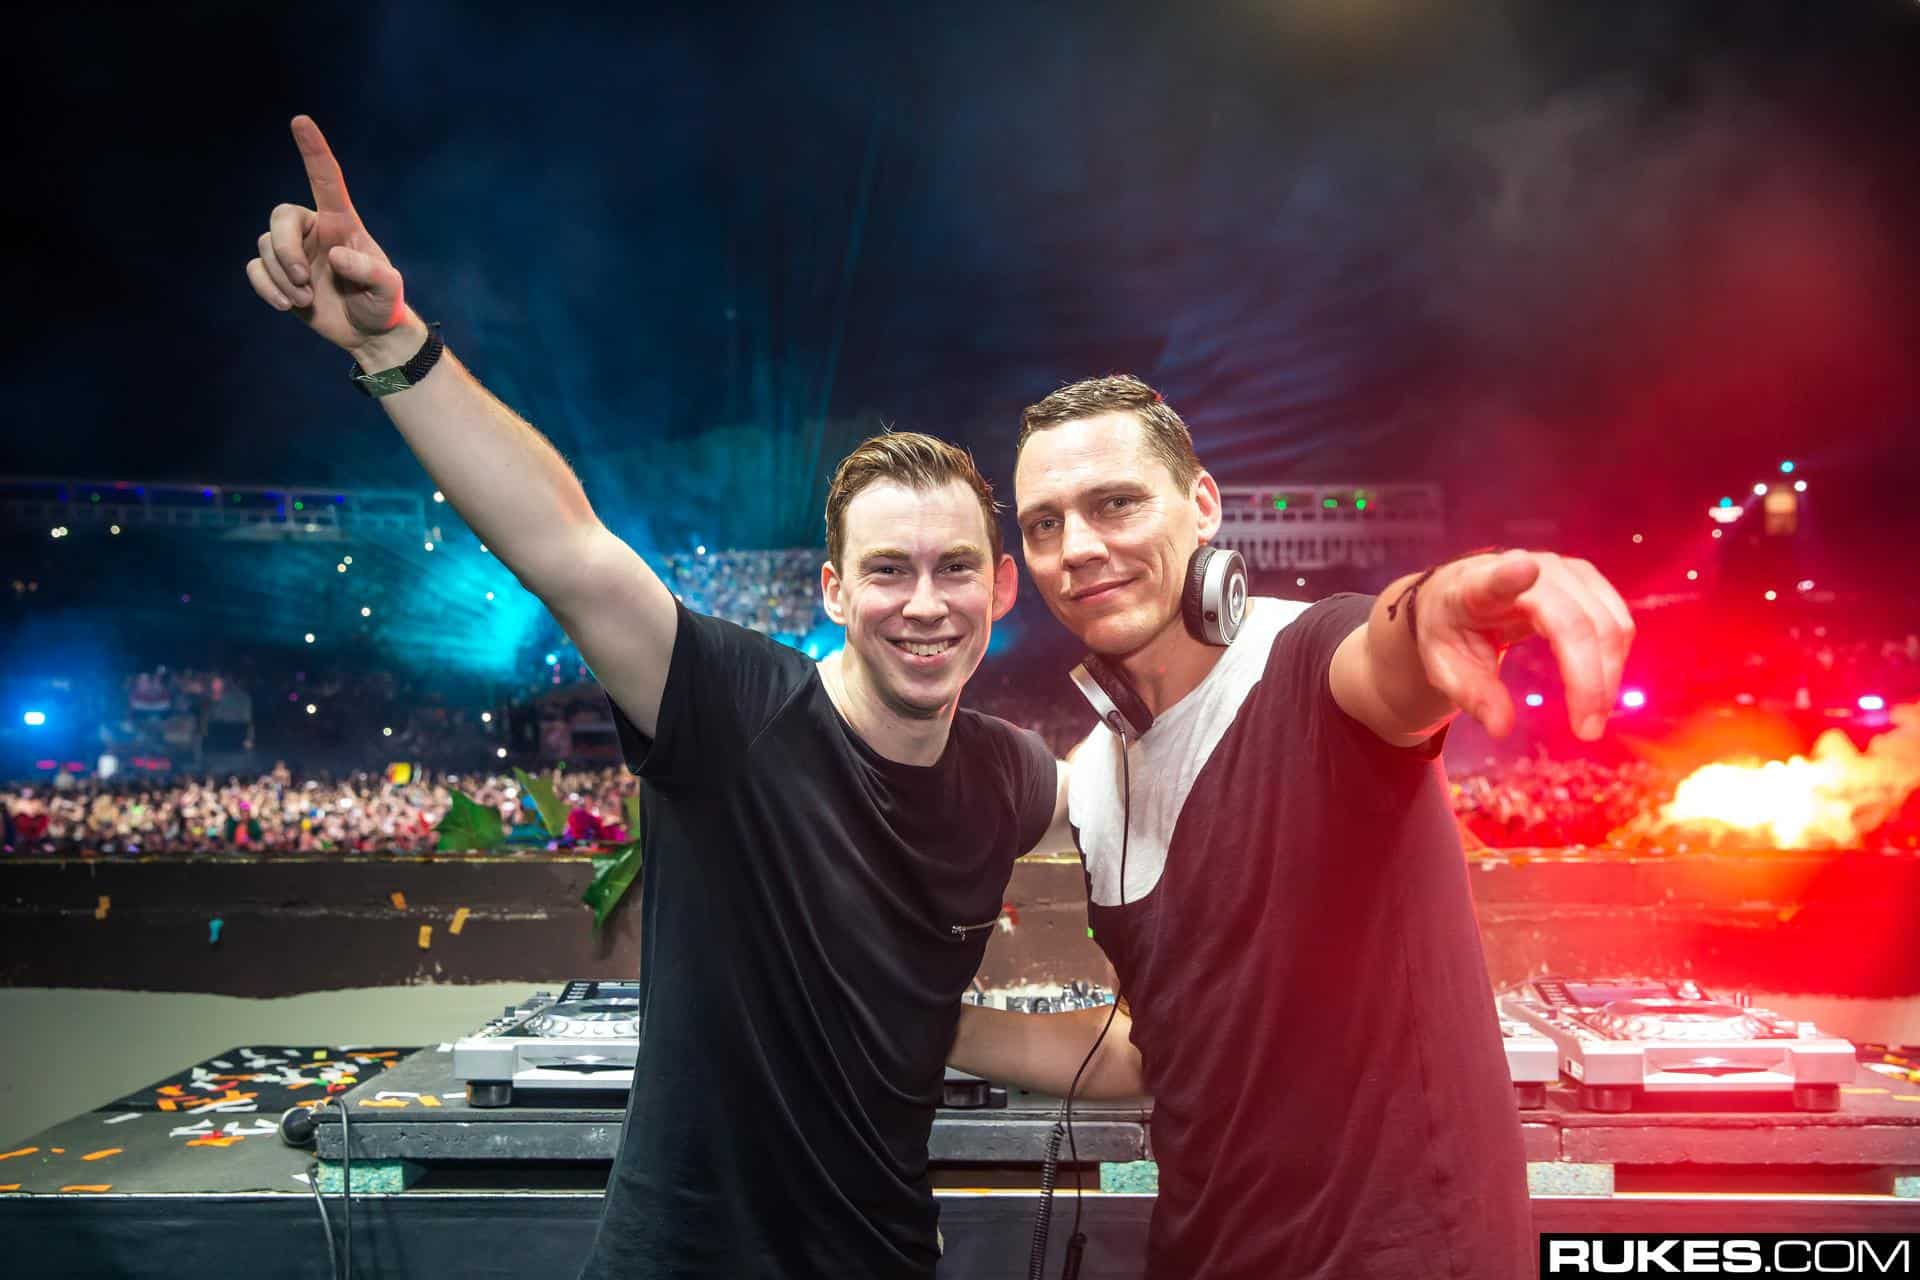 Tiësto brings out Hardwell for a B2B during his set at Breda Live